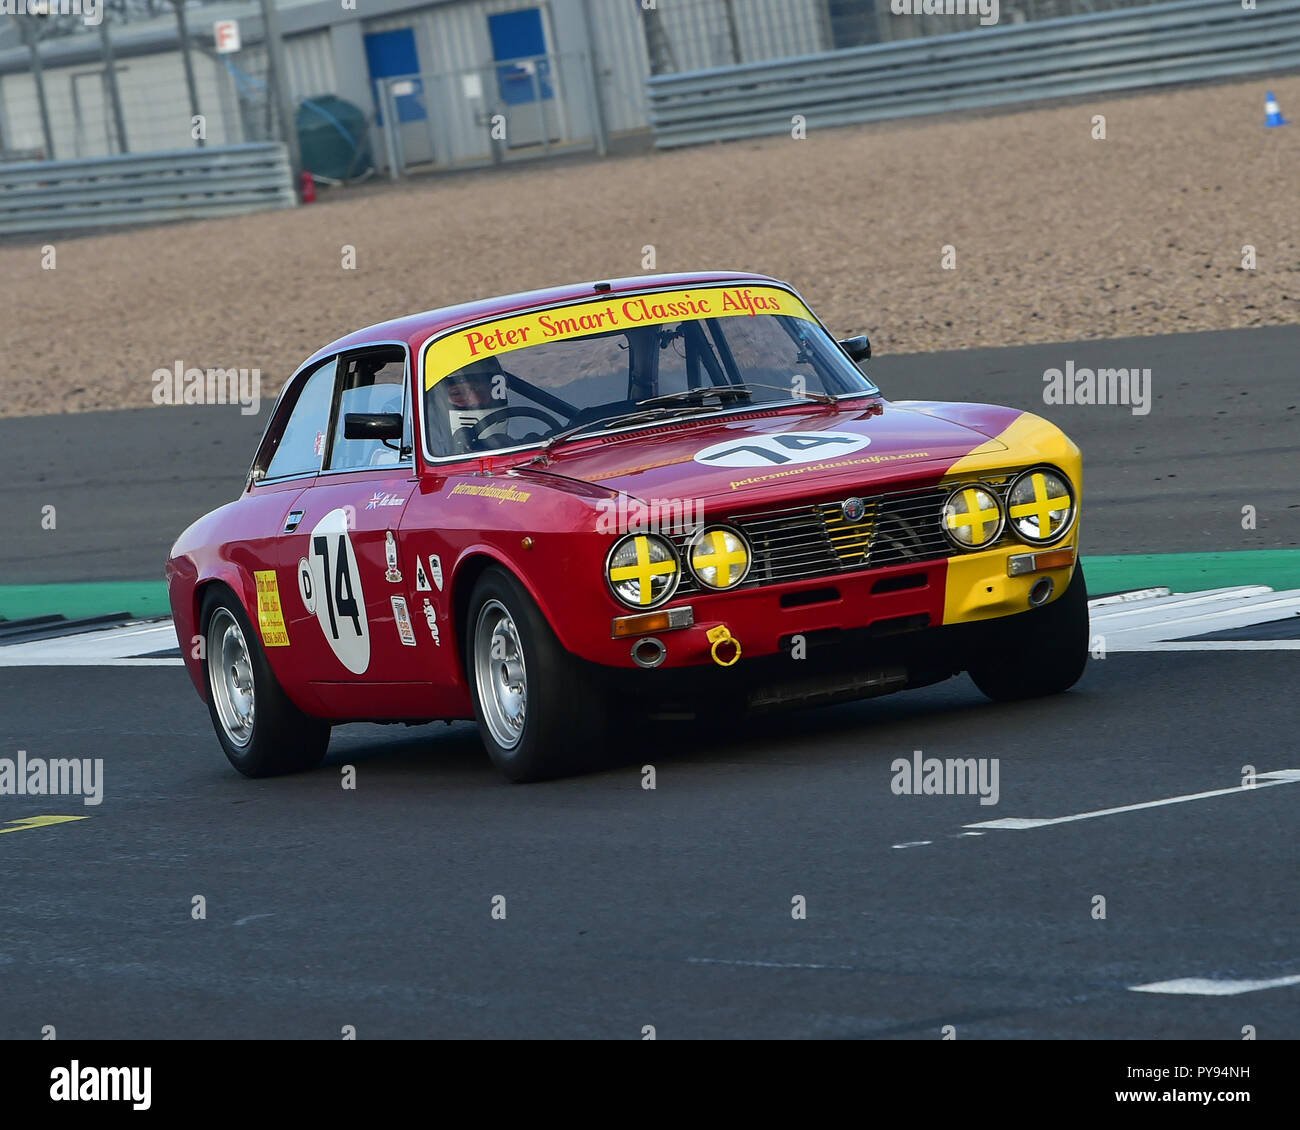 Mike Neumann Alfa Romeo 00 Gtv Hscc 70 S Road Sports Silverstone Finals Historic Race Meeting Silverstone October 18 Cars Classic Racing C Stock Photo Alamy